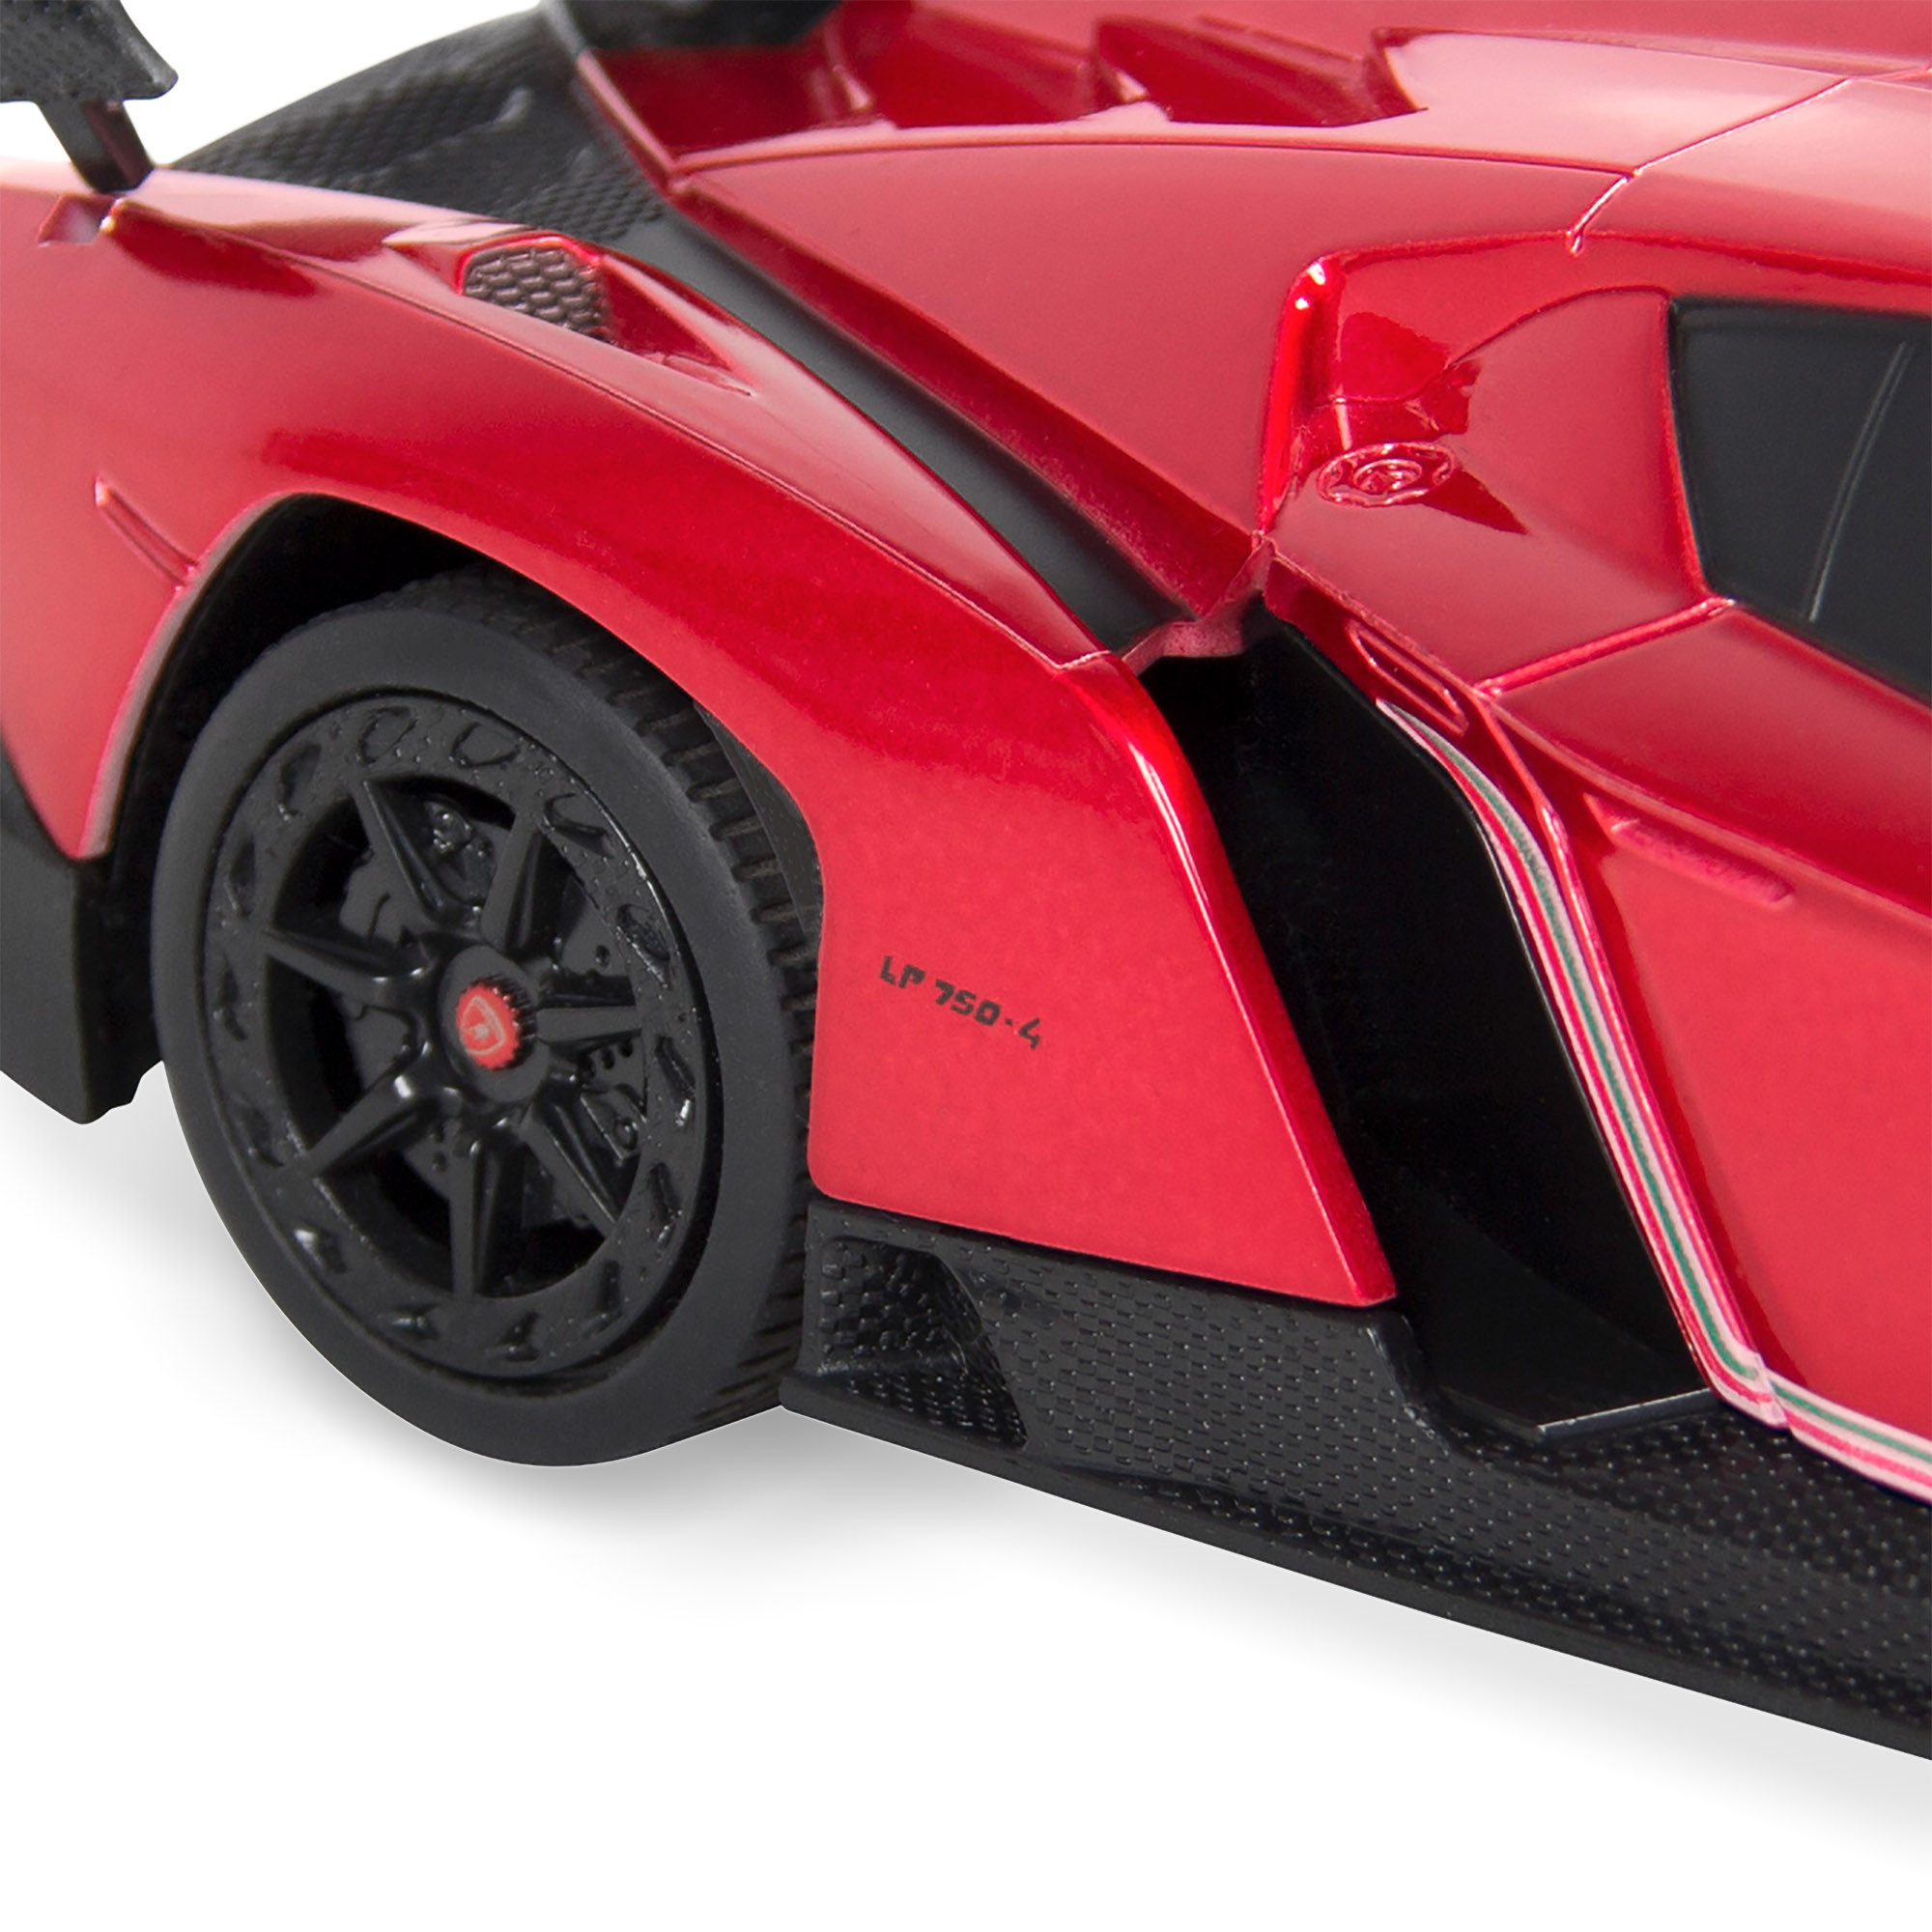 Best Choice Products 1/24 Officially Licensed RC Lamborghini Veneno Sport Racing Car w/ 2.4GHz Remote Control - Red - image 5 of 6